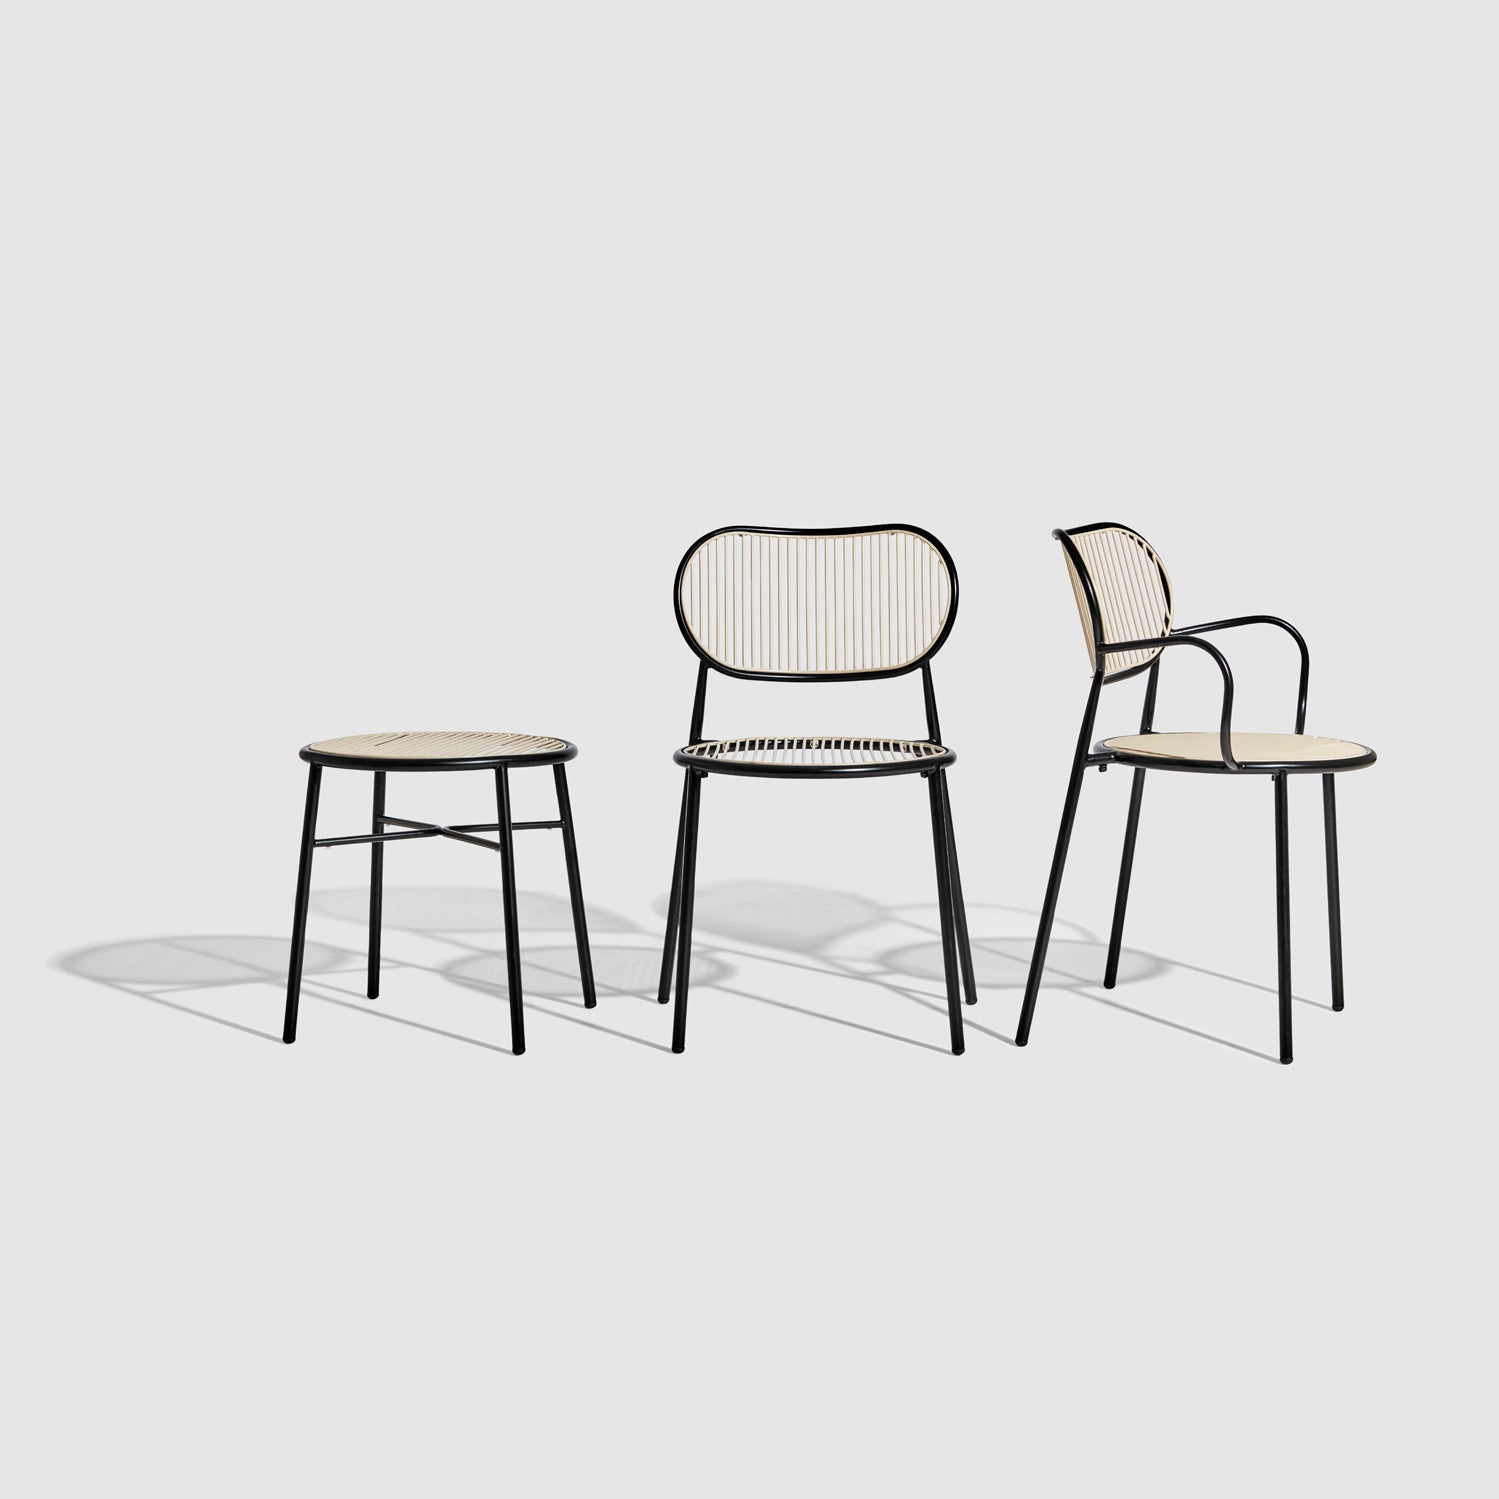 Piper Low Stool and Chairs | Stackable Outdoor | Designed by GibsonKarlo | DesignByThem